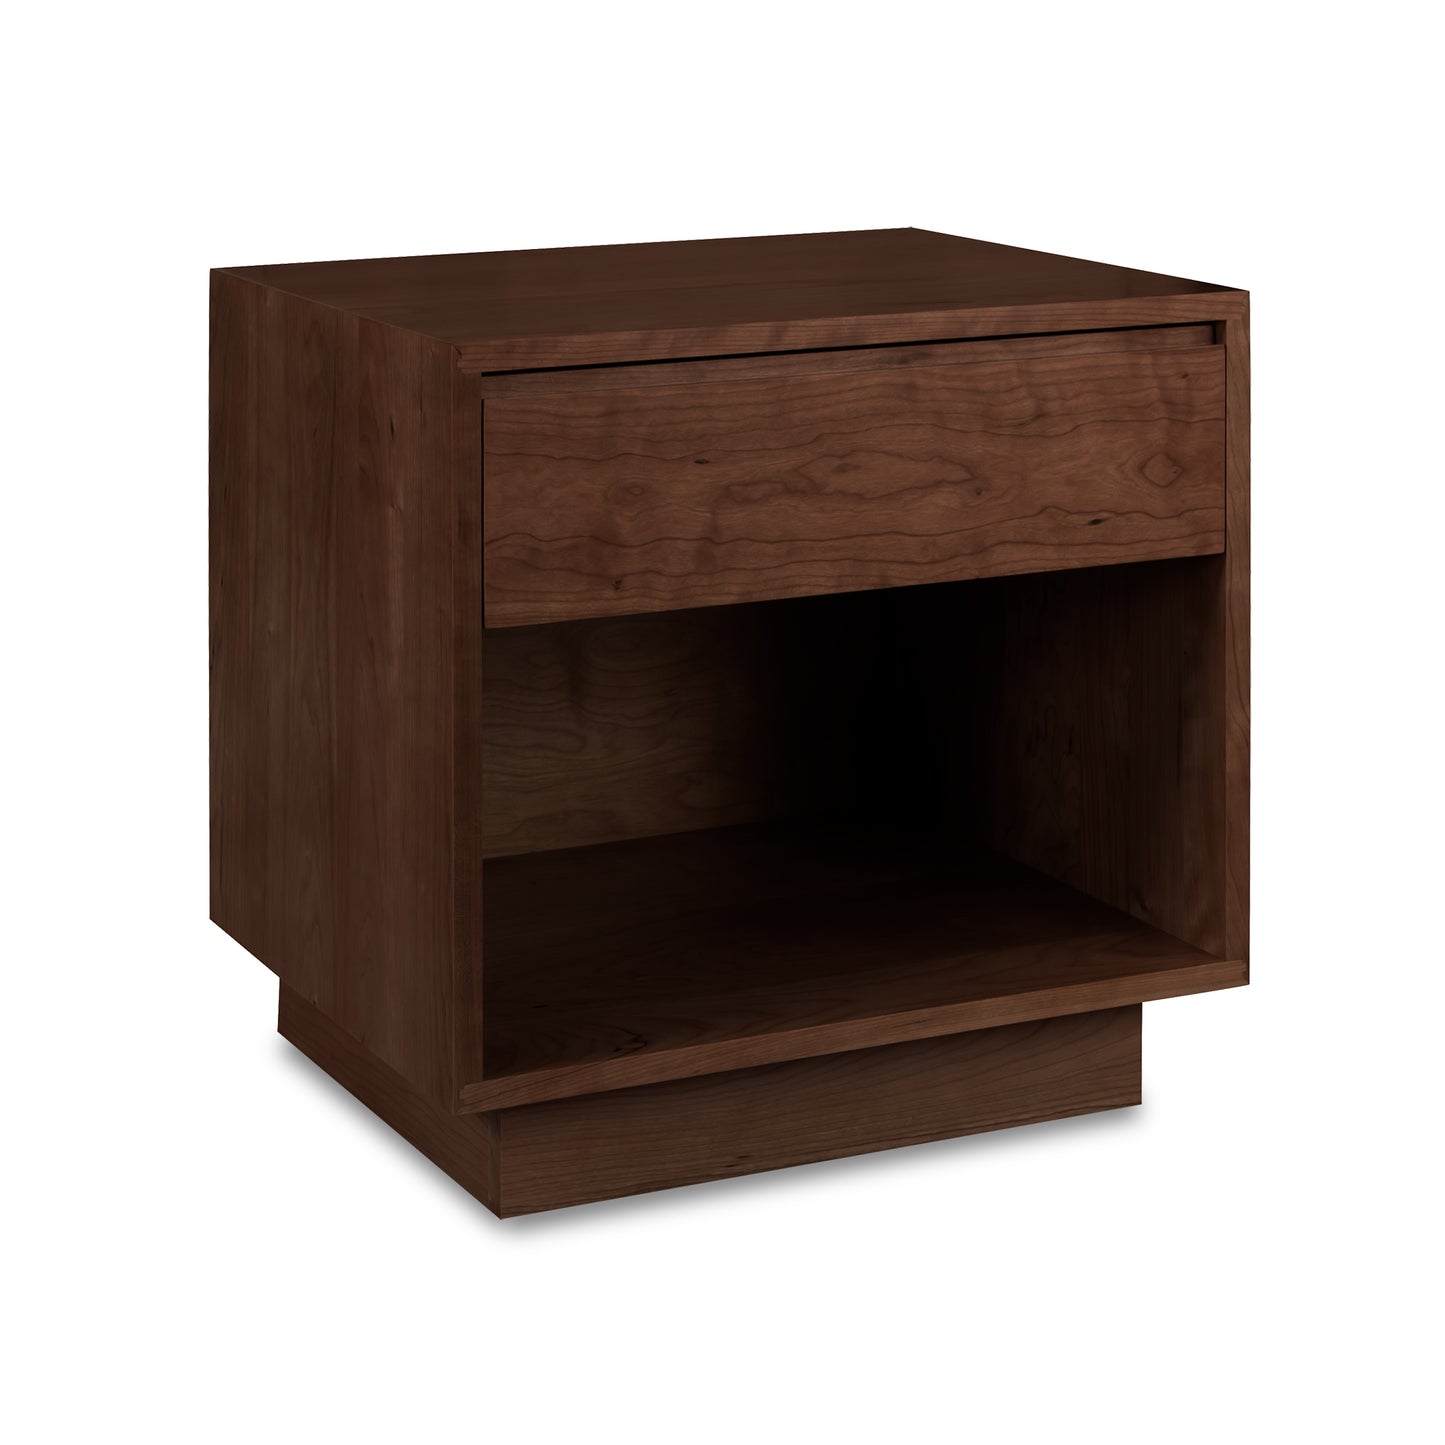 A Sutton 1-Drawer Enclosed Shelf Nightstand made of solid wood, featuring a convenient drawer on top, crafted by Lyndon Furniture.